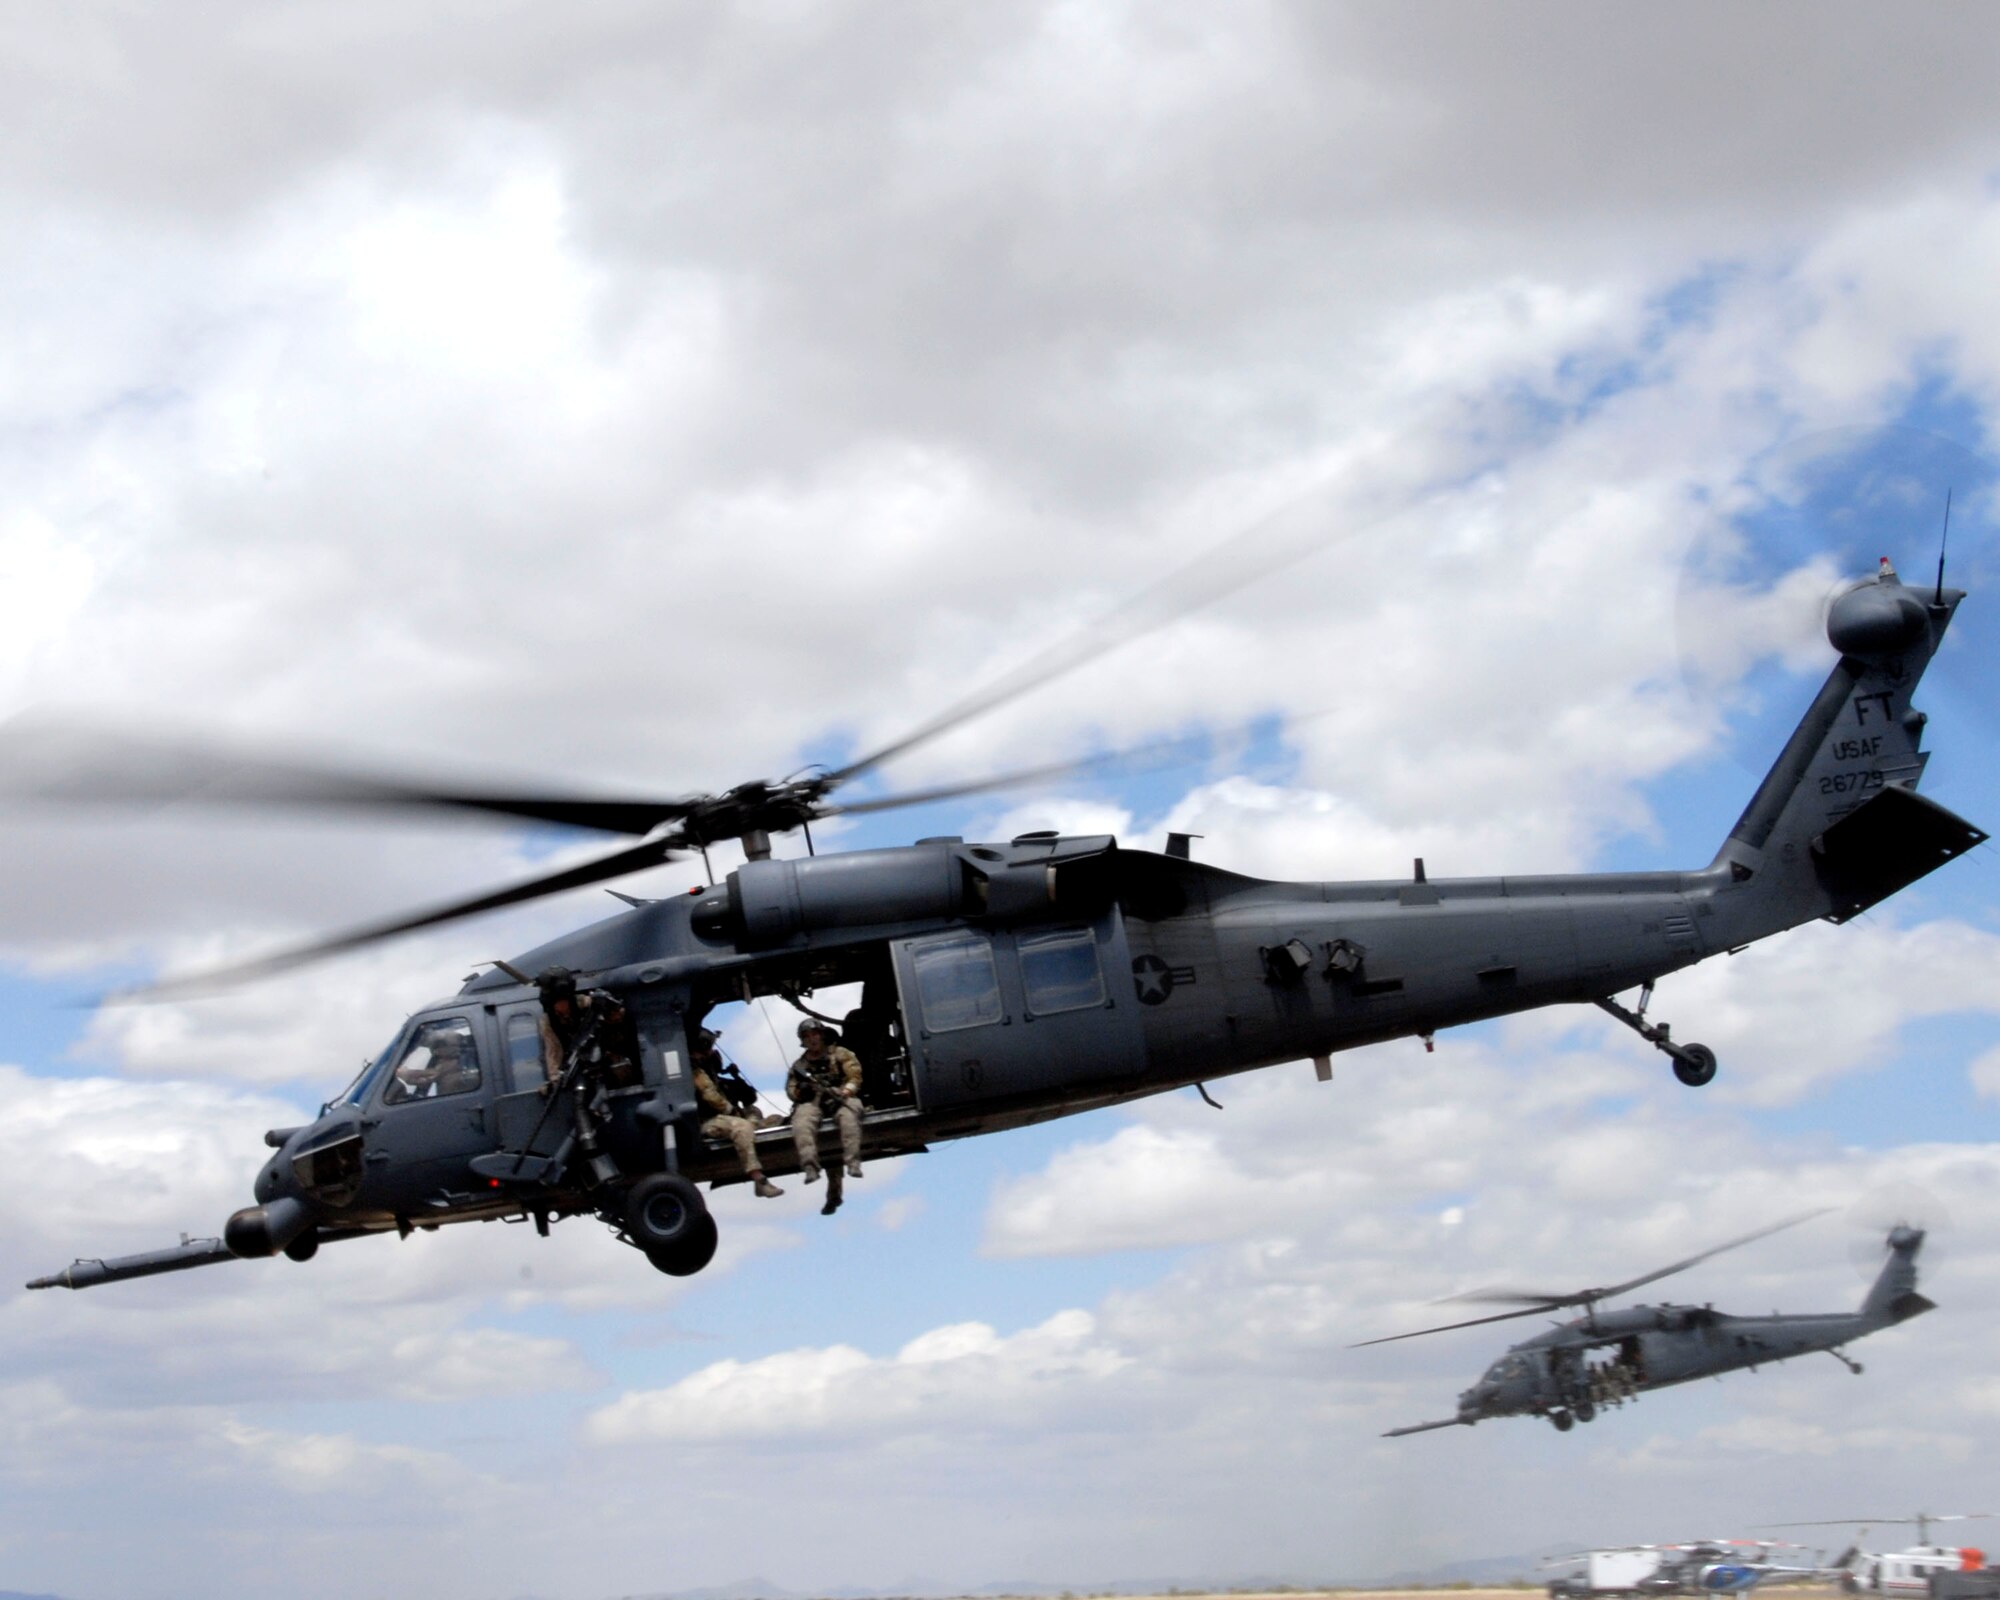 Two HH-60G Pave Hawk rescue helicopters participating in Angel Thunder 2010 take of to rescue survivors of an exercise scenario April 21, 2010 at Bisbee-Douglas International Airport more than 100 miles southeast of Davis-Monthan Air Force Base, Tucson, Ariz. (U.S. Air National Guard photo/Airman 1st Class Jessica Green)